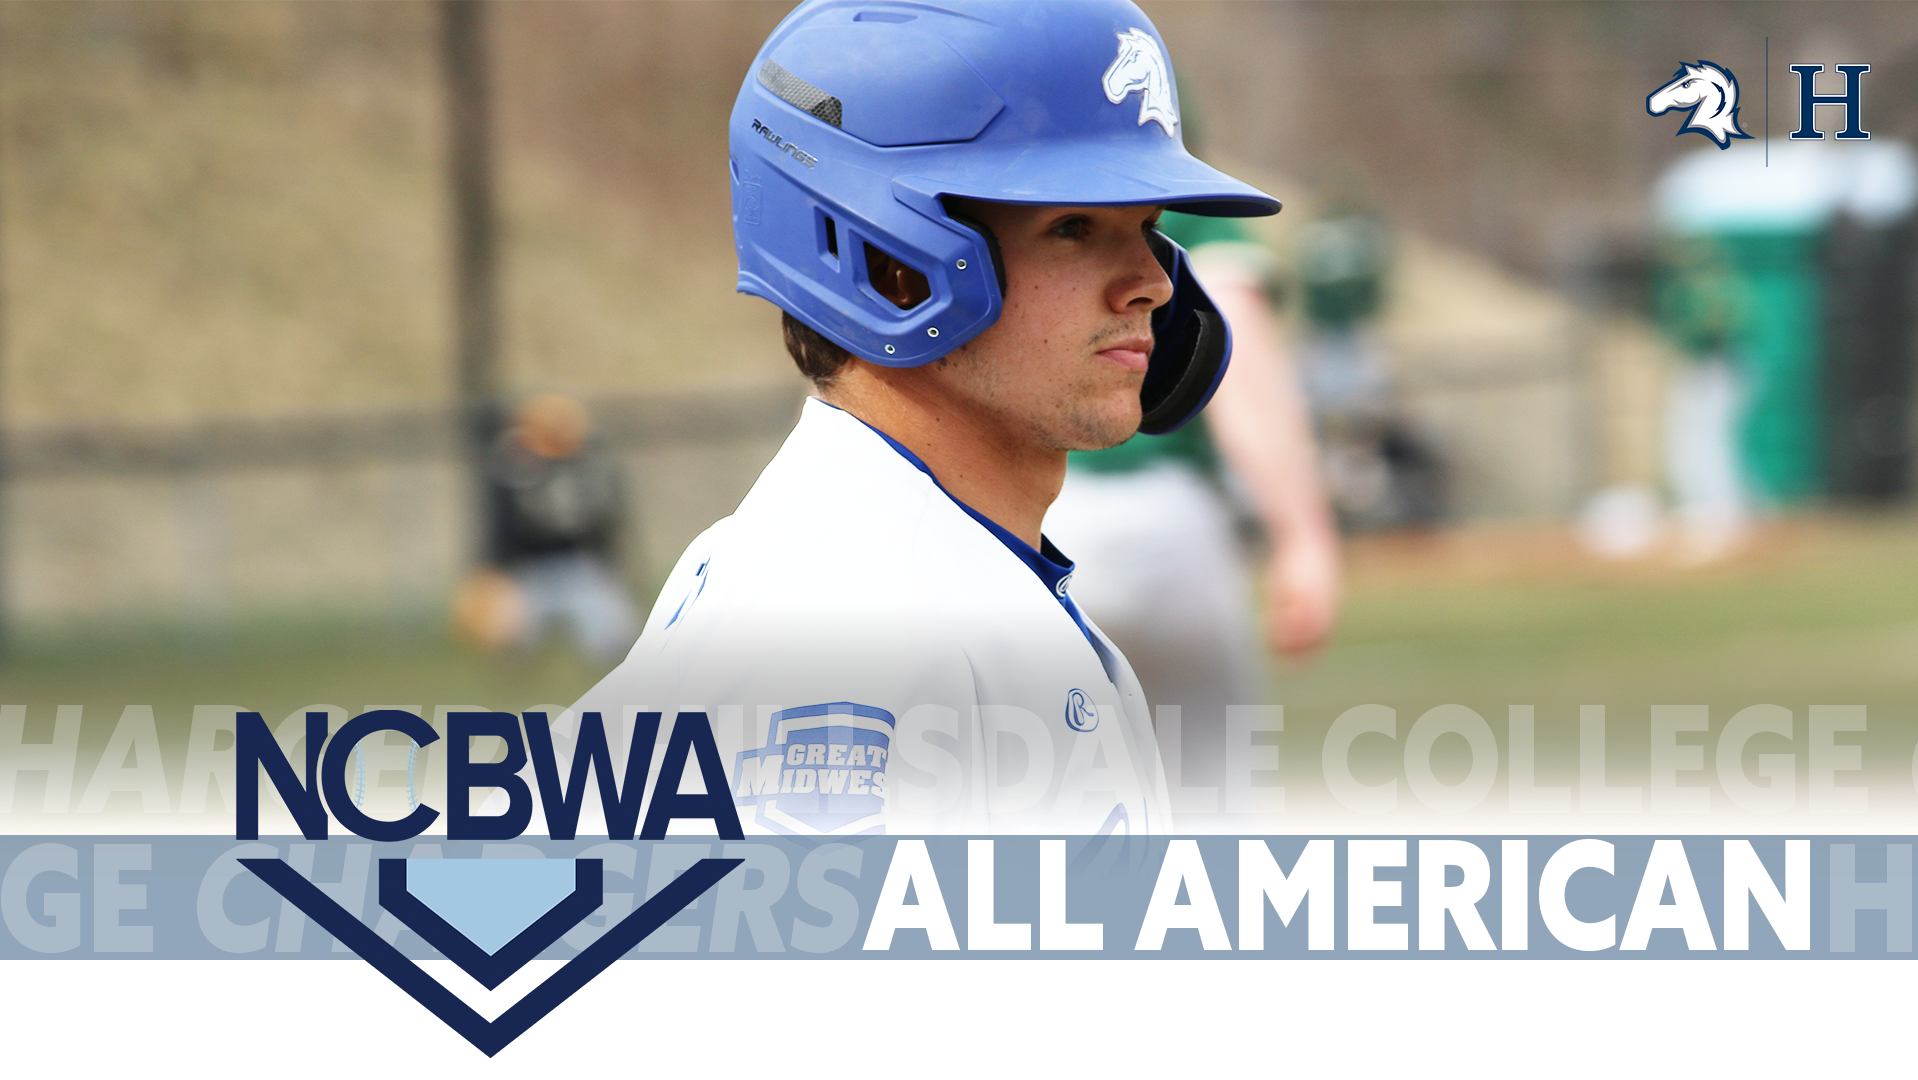 Chargers’ Aidan Brewer named 2022 NCBWA First Team All-American